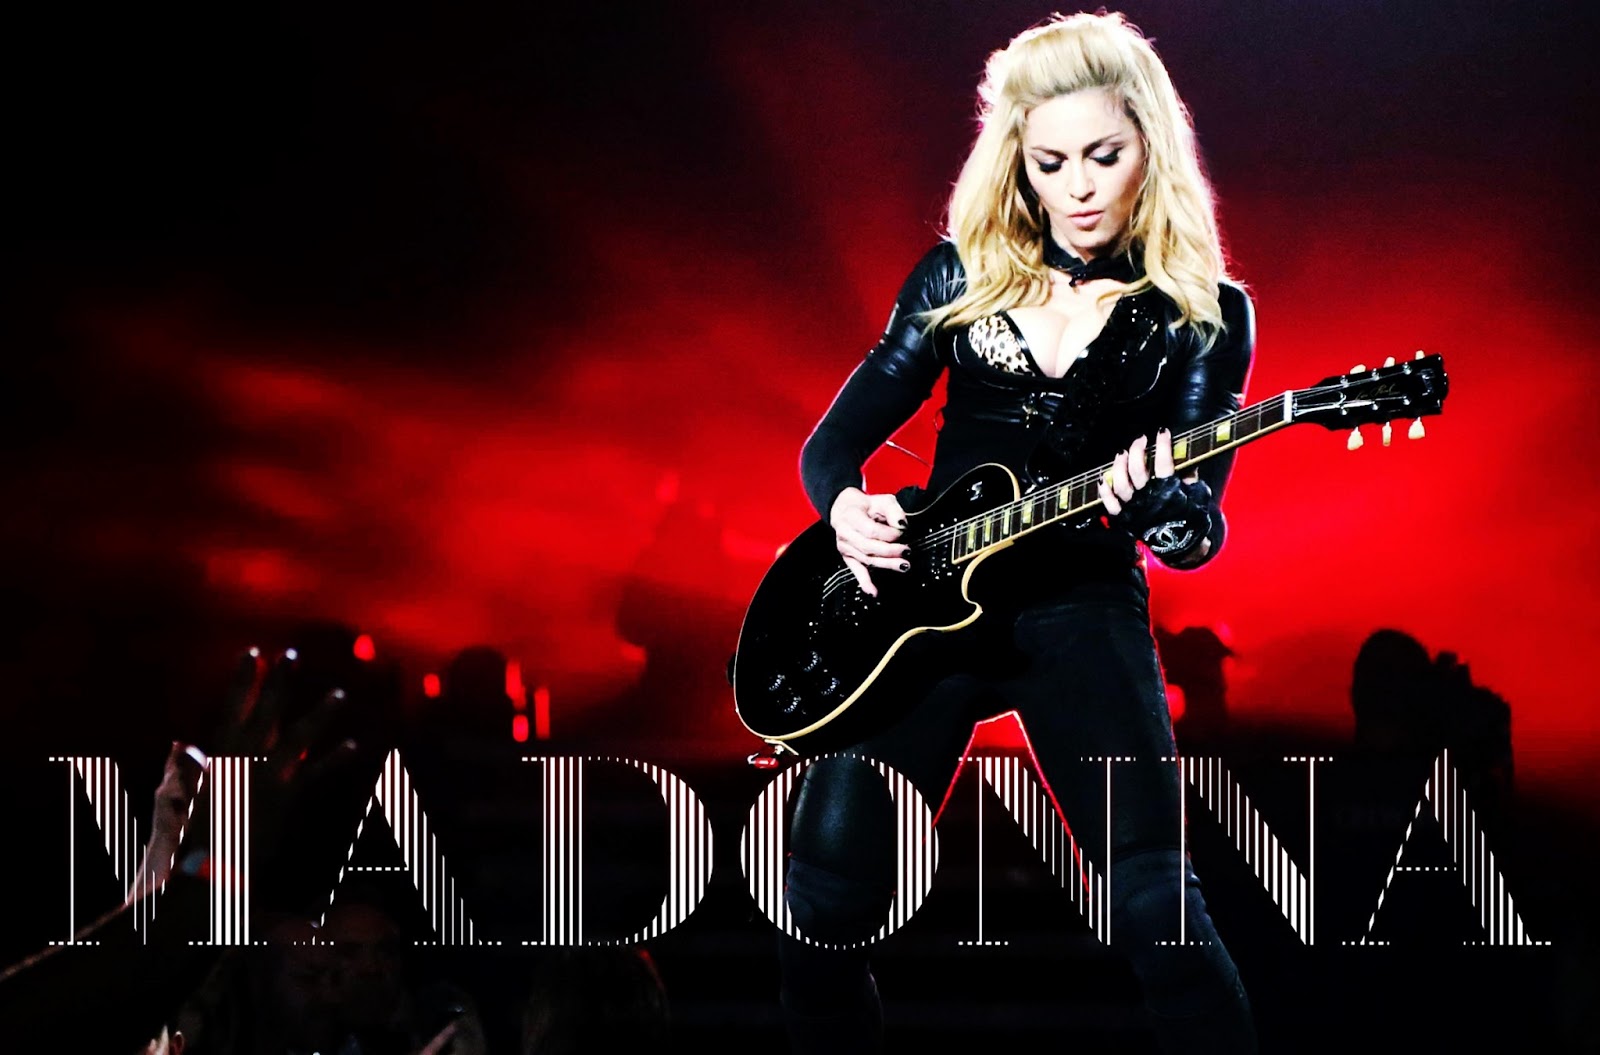 Madonna Fanmade Covers The Mdna Tour Wallpaper